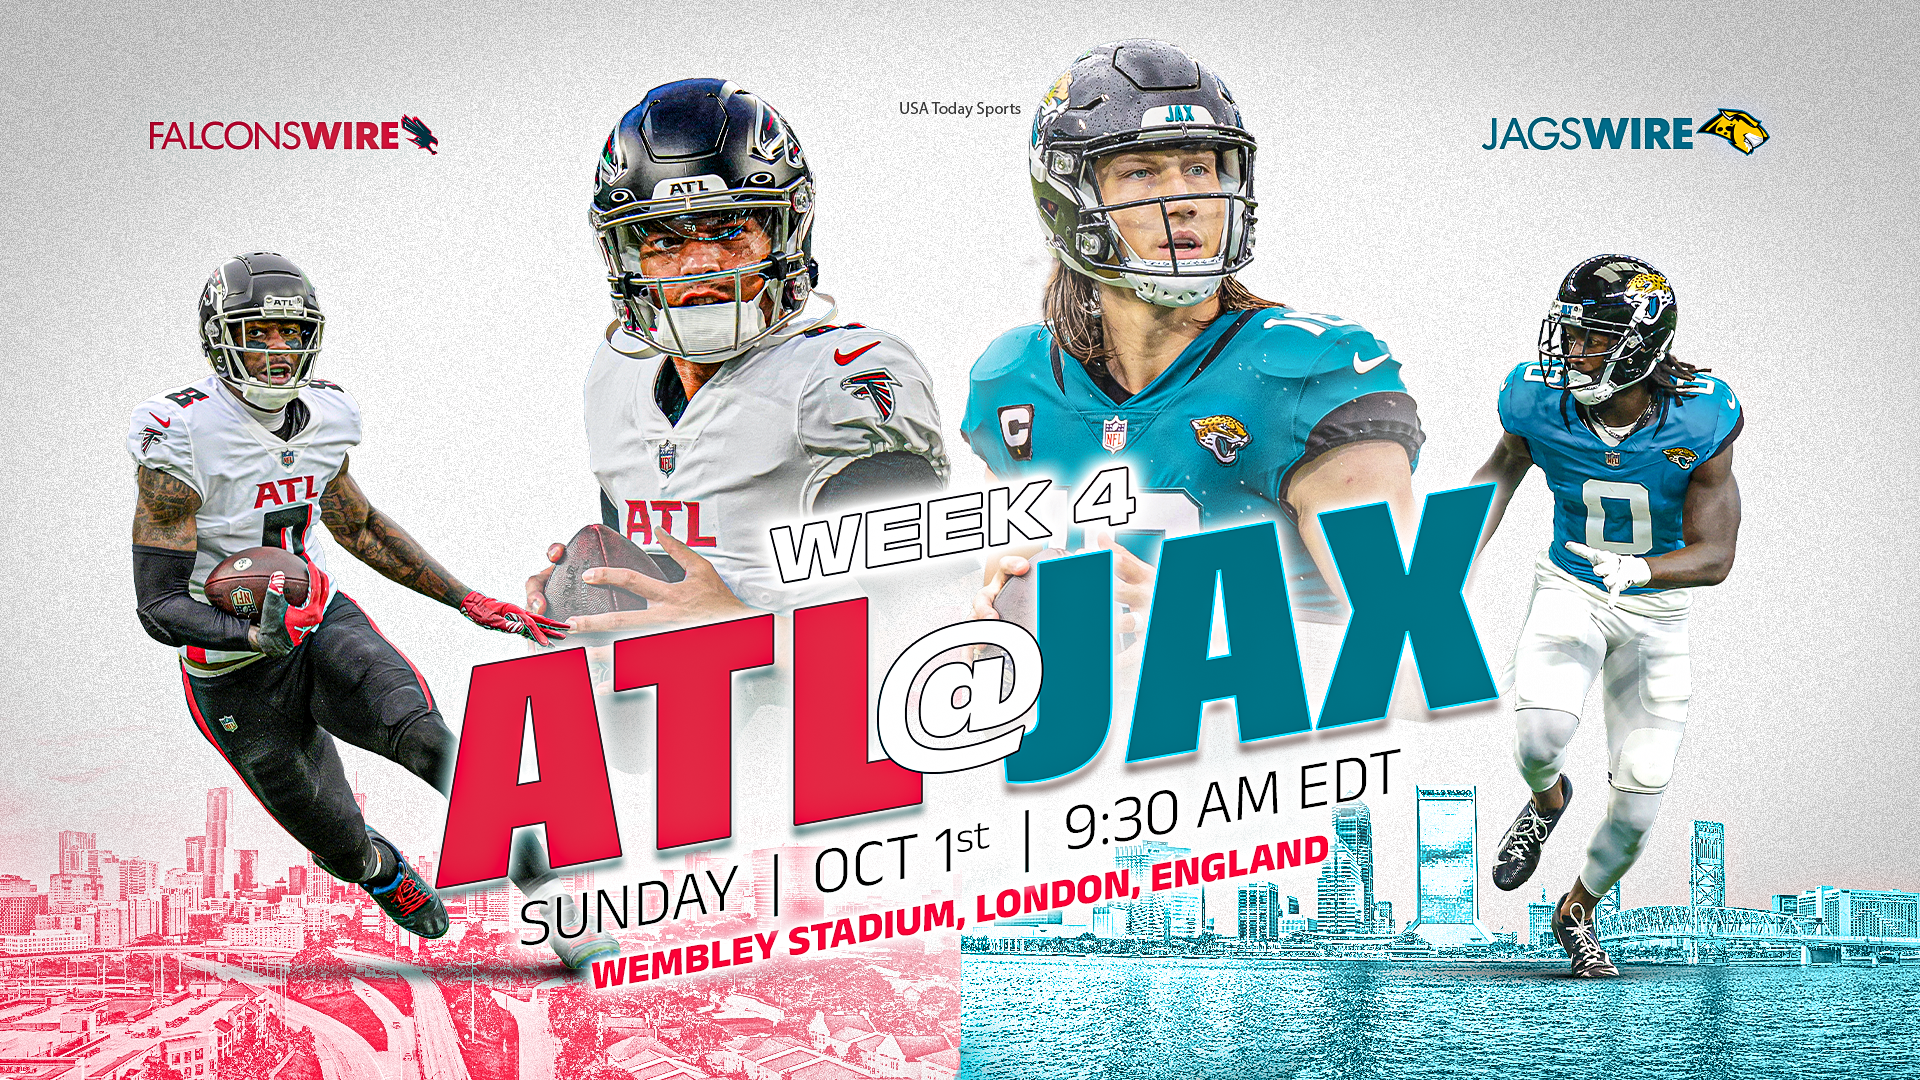 Falcons v Jaguars livestream: How to watch NFL London for free